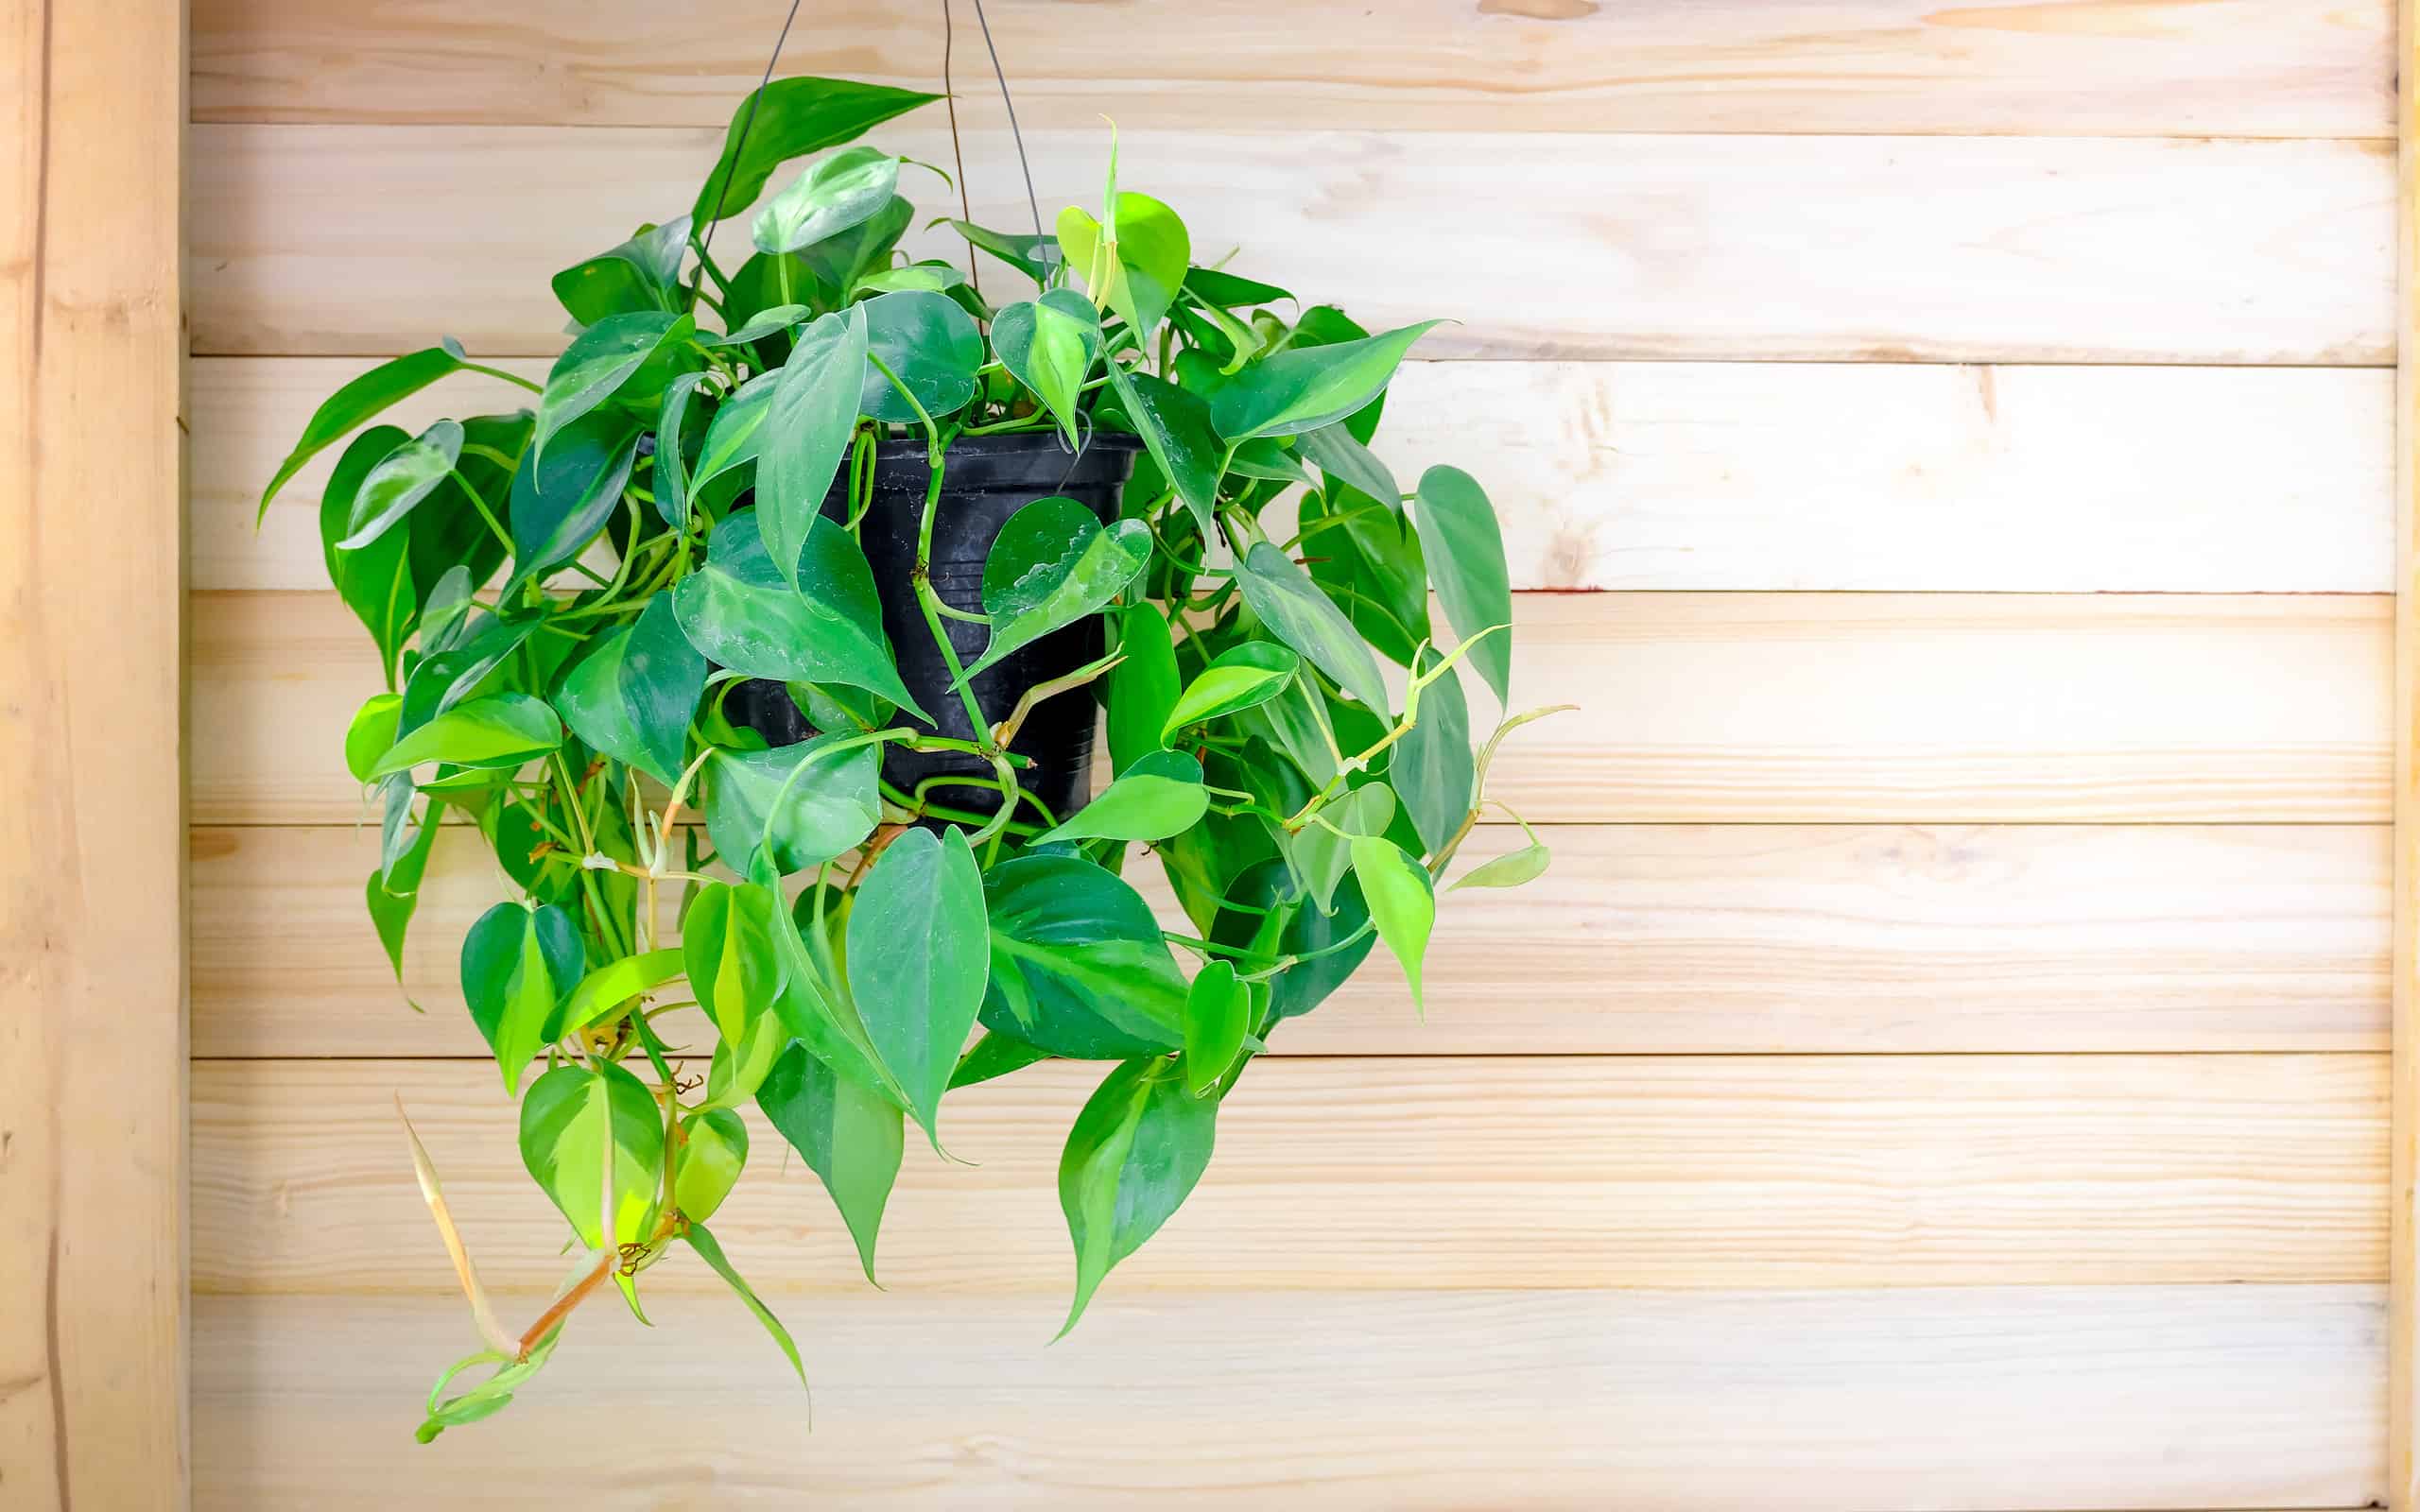 Philodendron Brasil (Philodendron Hederaceum Scandens Brasil) hang on wooden wall. Tropical creeper plant with yellow stripes in flower pot. Green houseplant on oak wall, modern interior decoration